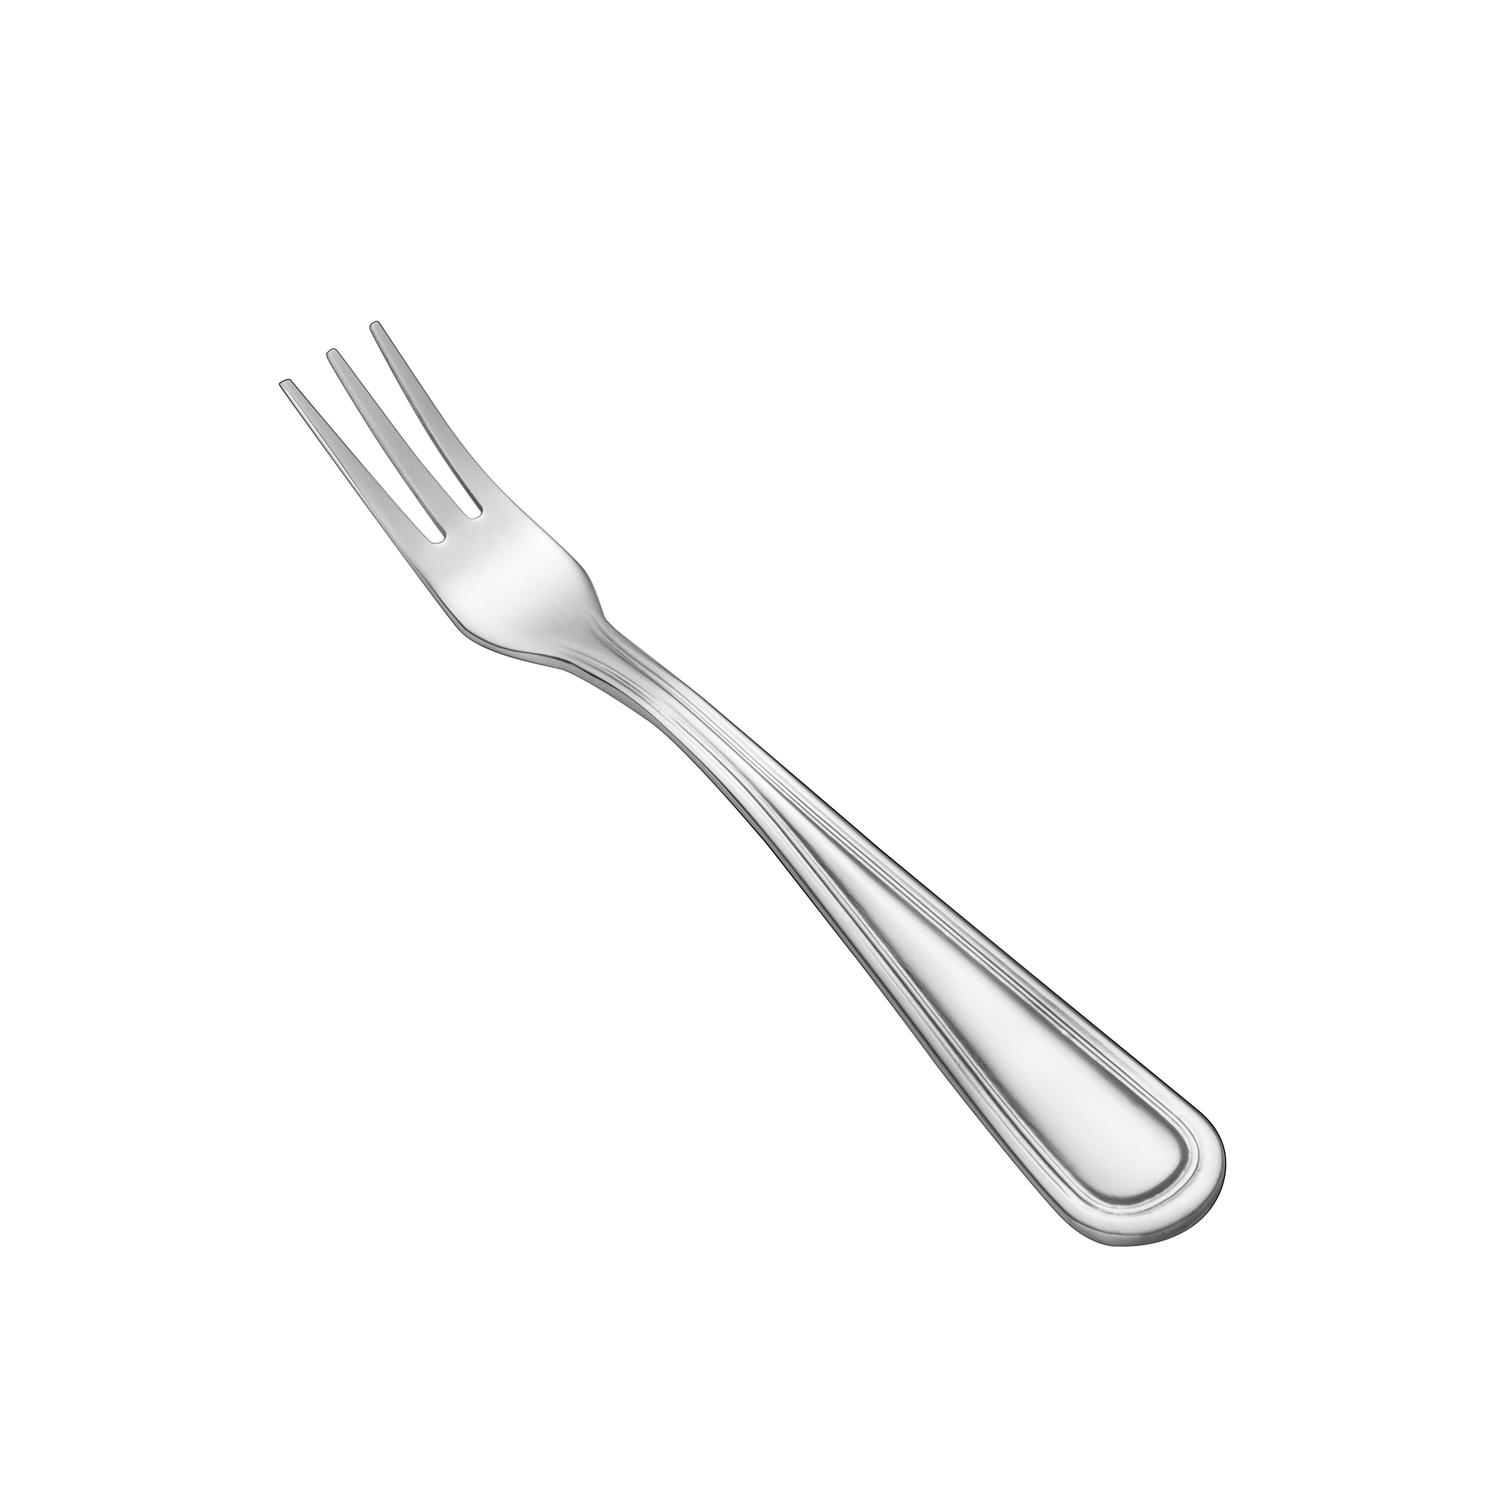 CAC China 3002-07 Prime Oyster Fork, Extra Heavyweight 18/0, 5 5/8"